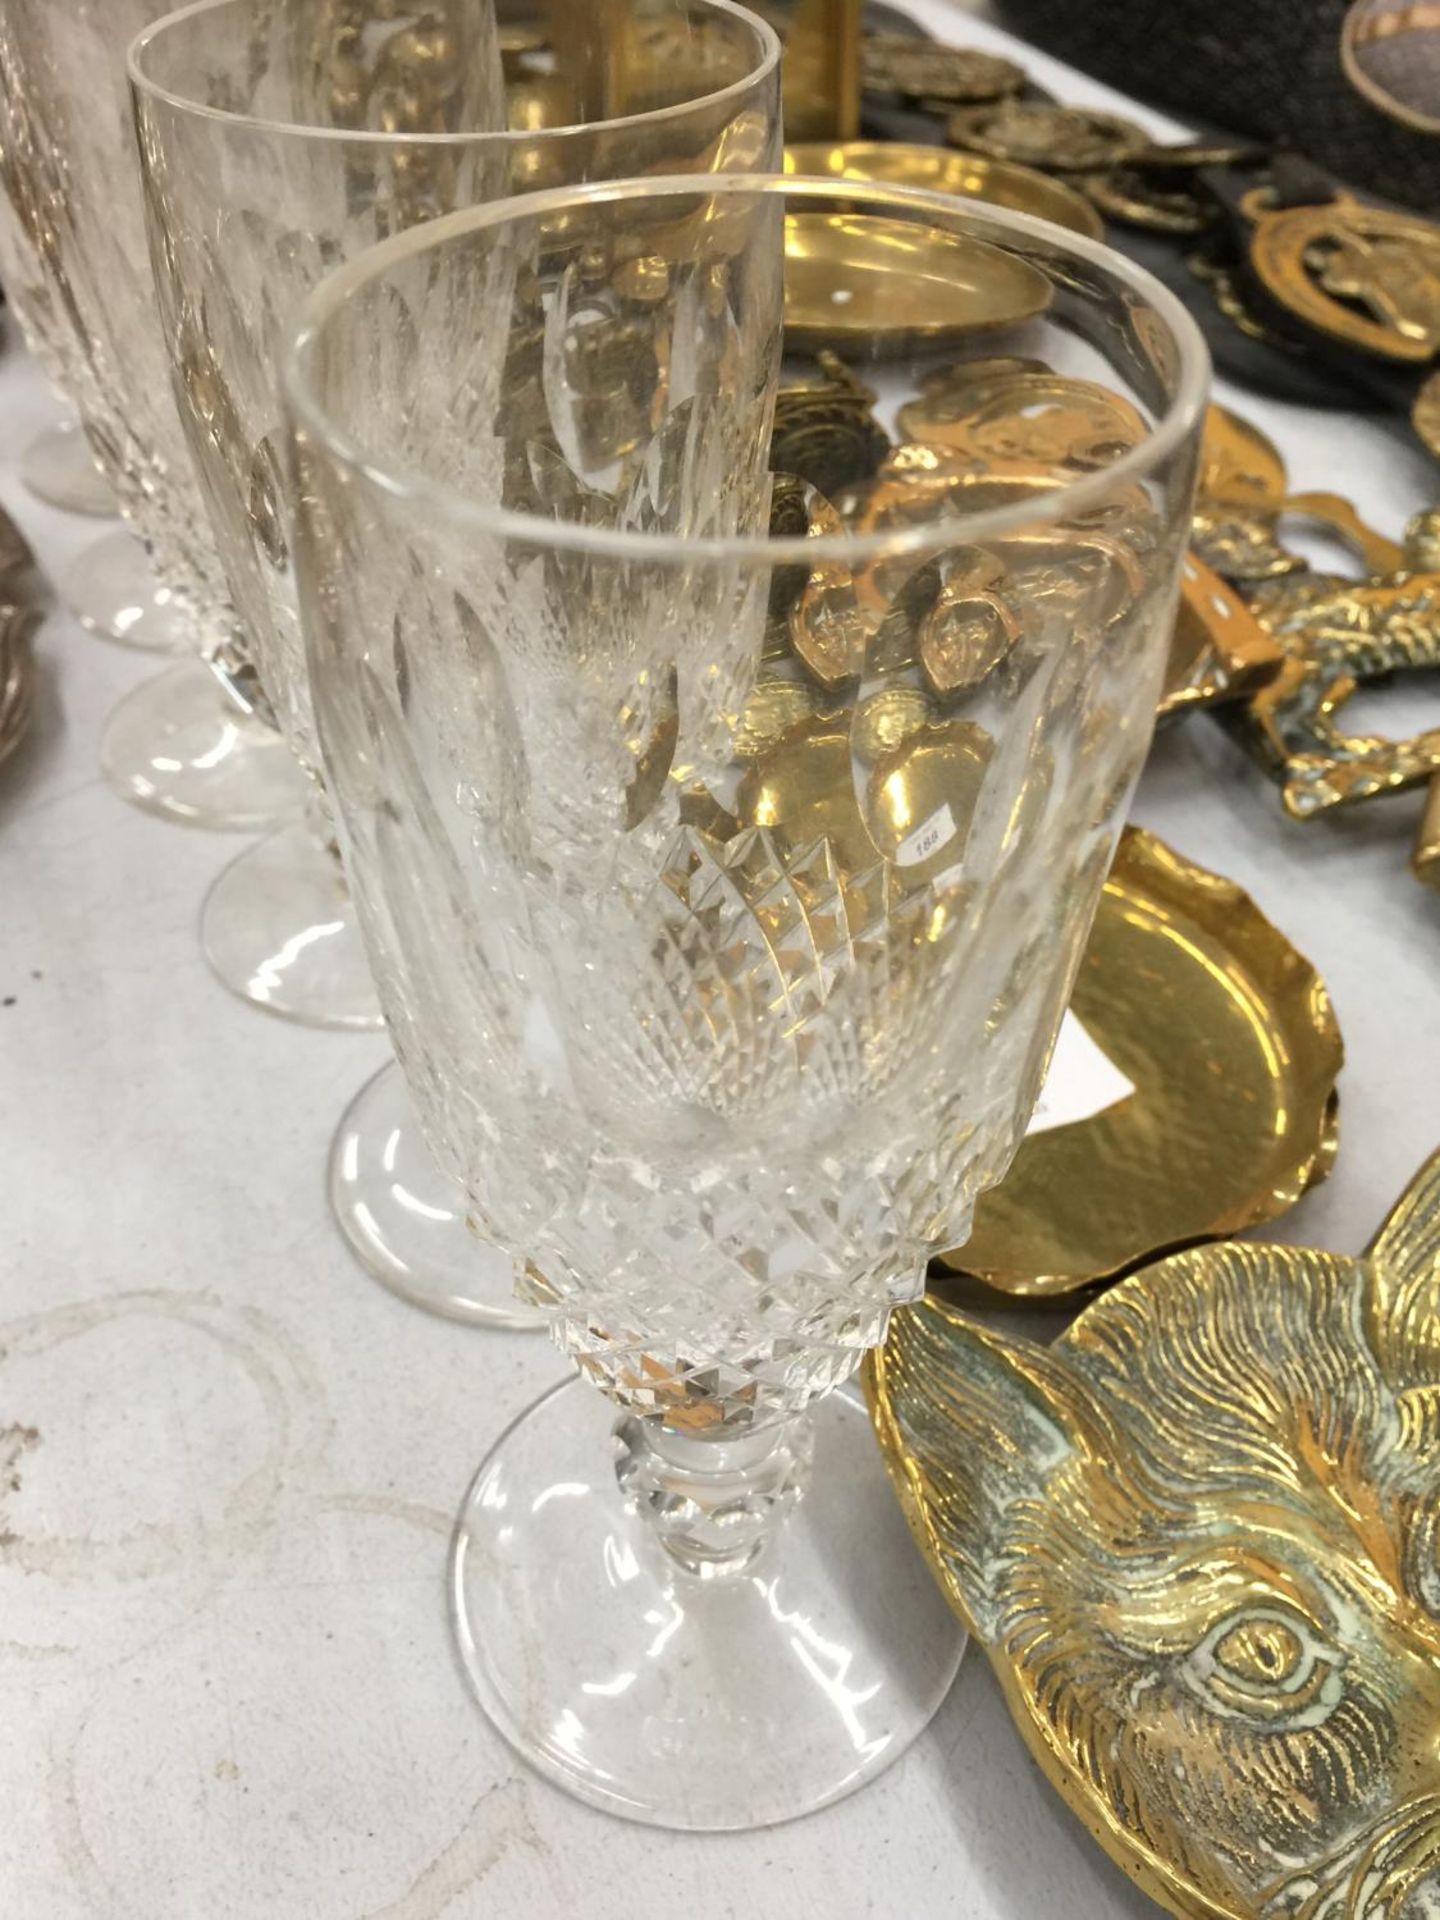 SIX WATERFORD CRYSTAL WINE GLASSES - Image 2 of 3